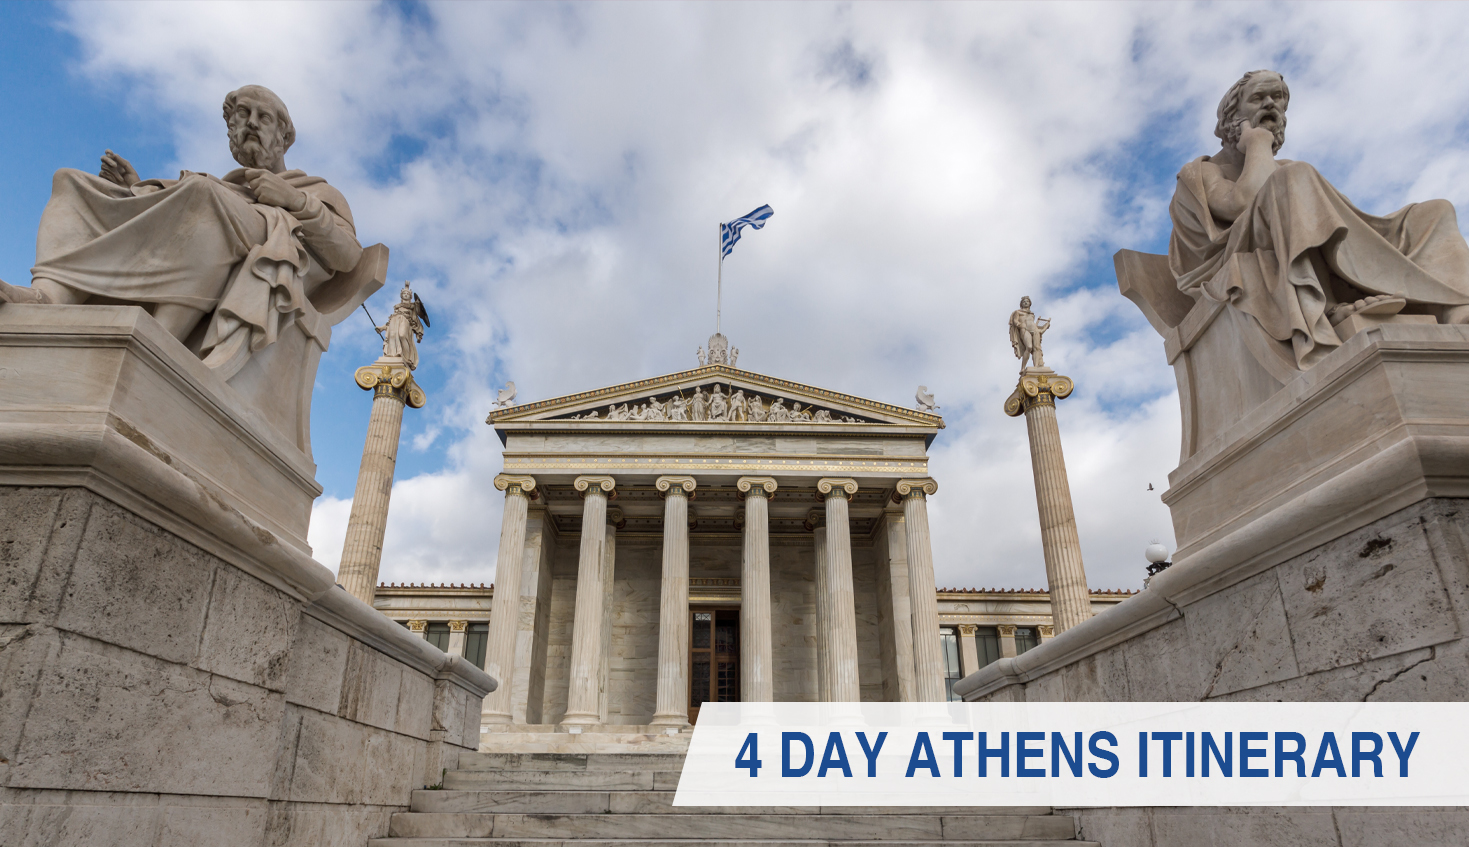 4 Day Athens Itinerary